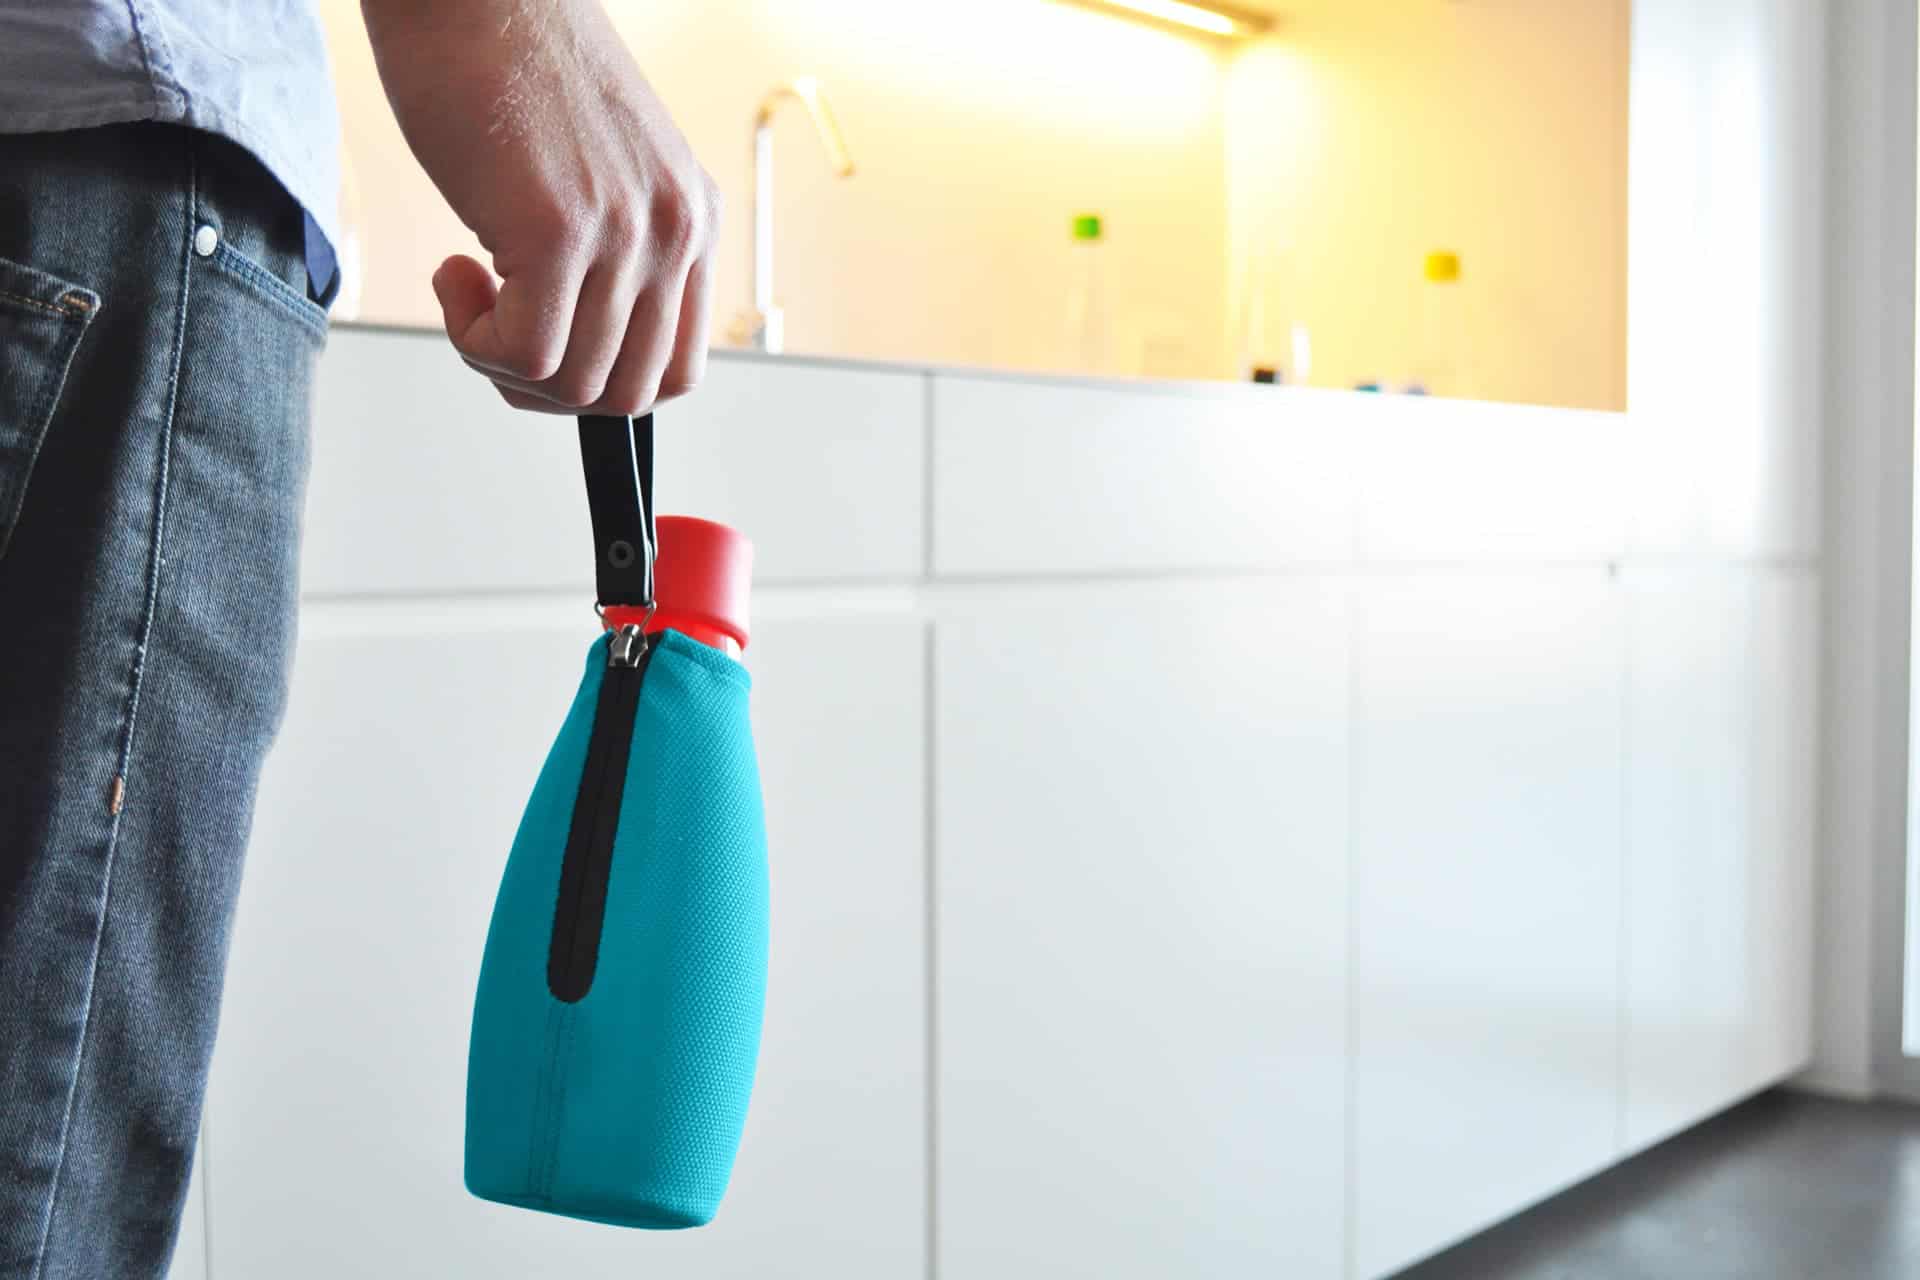 reusable water bottle held in a pouch